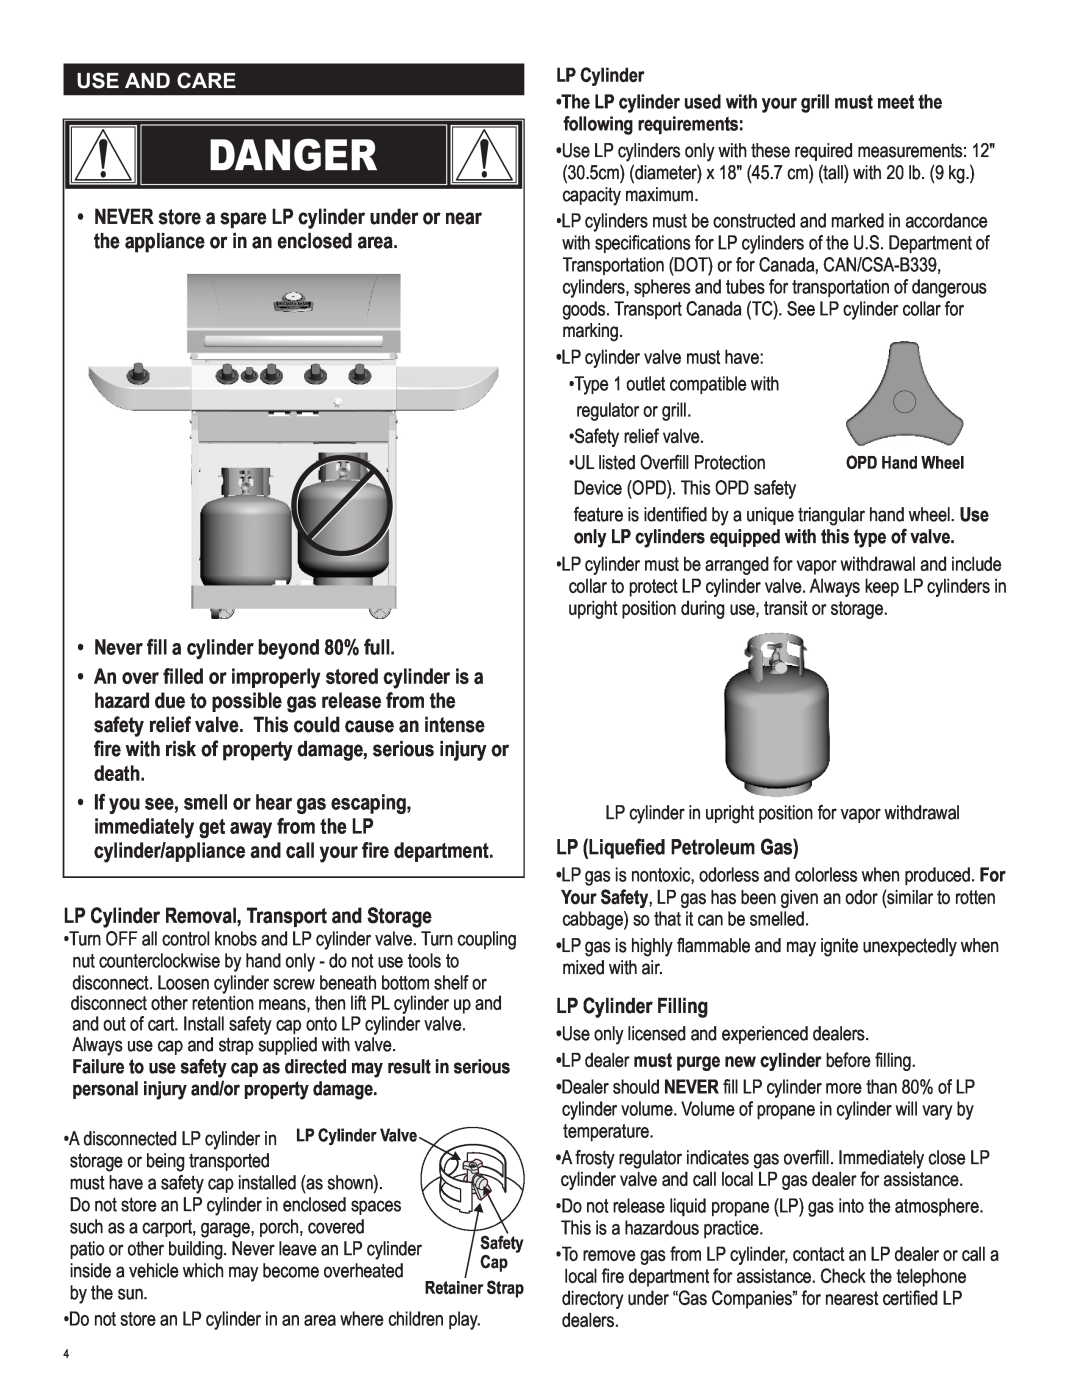 Char-Broil 463247412 manual Danger, Use And Care, Failure to use safety cap as directed may result in serious, LP Cylinder 